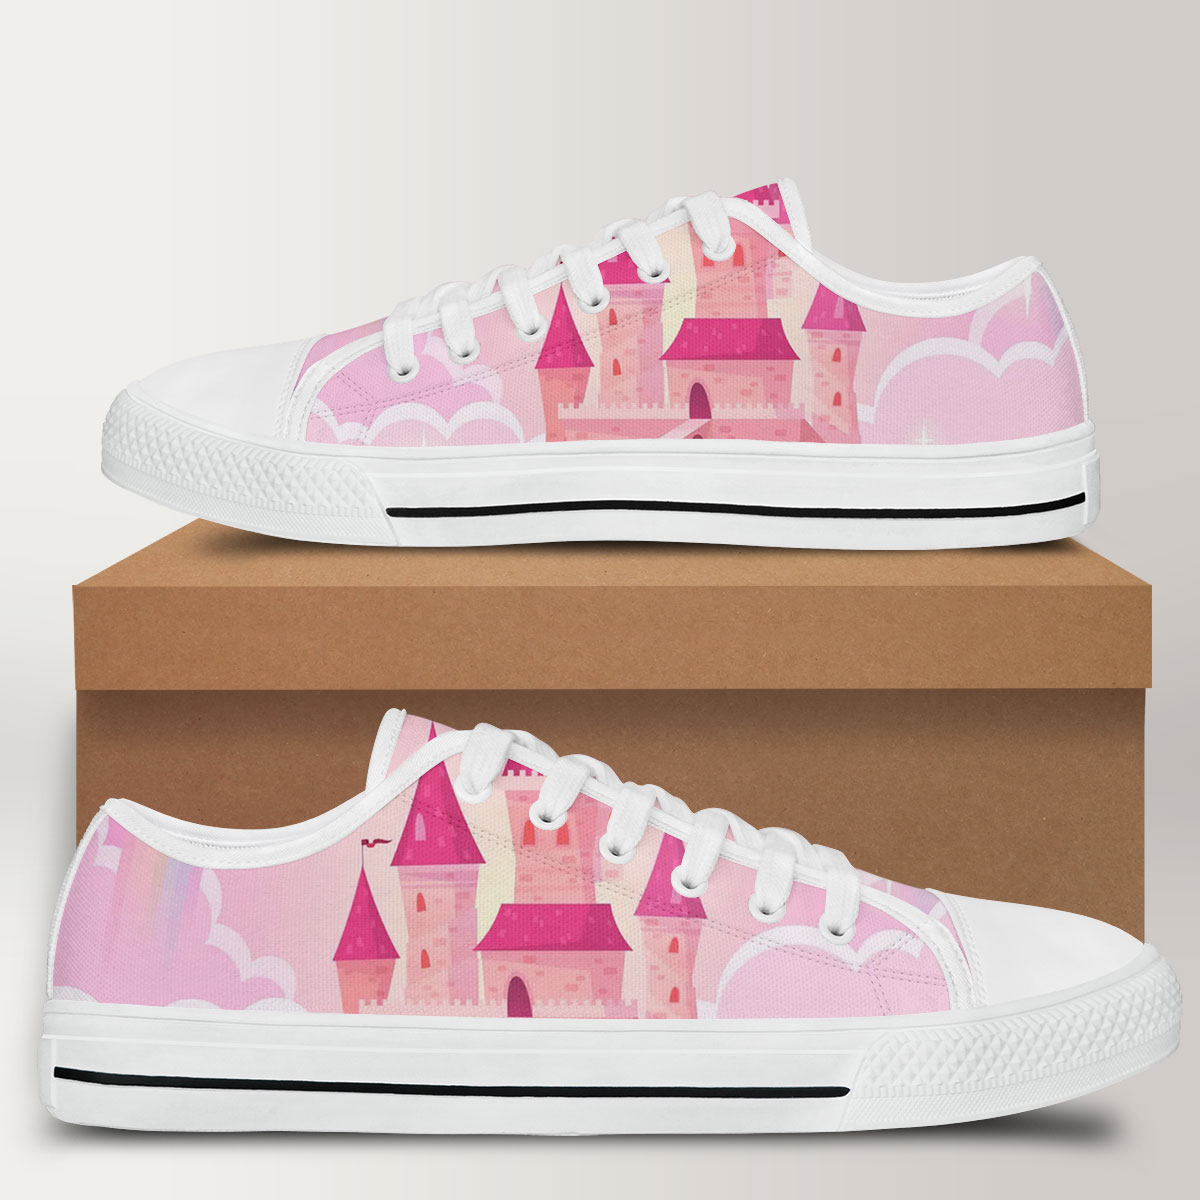 Magic Pink Rainbow Castel Low Top Shoes